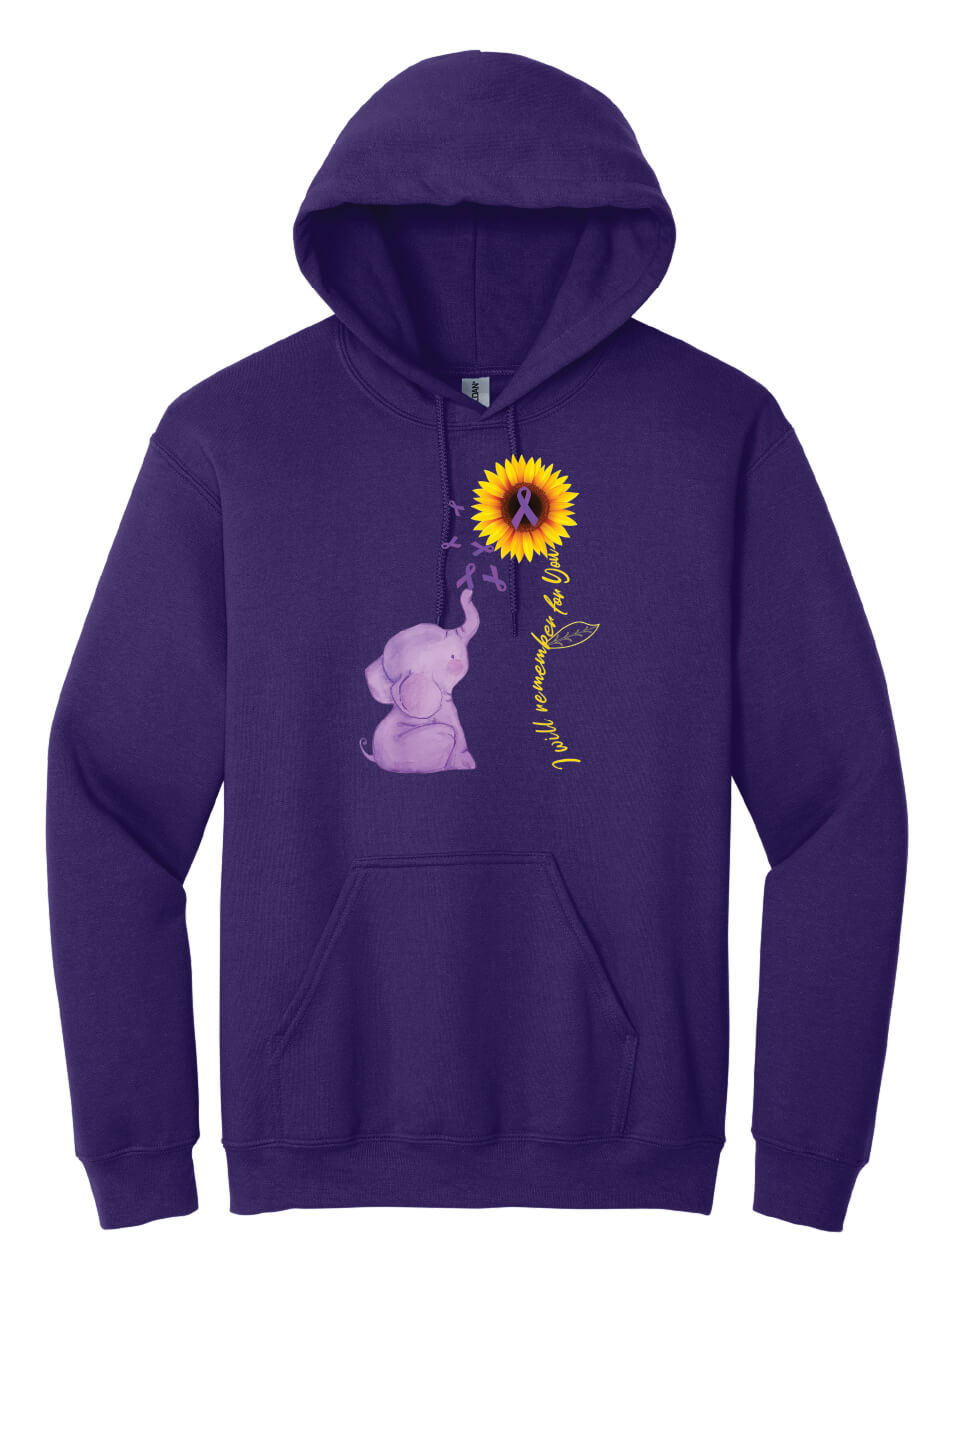 I Will Remember For You Hoodie purple